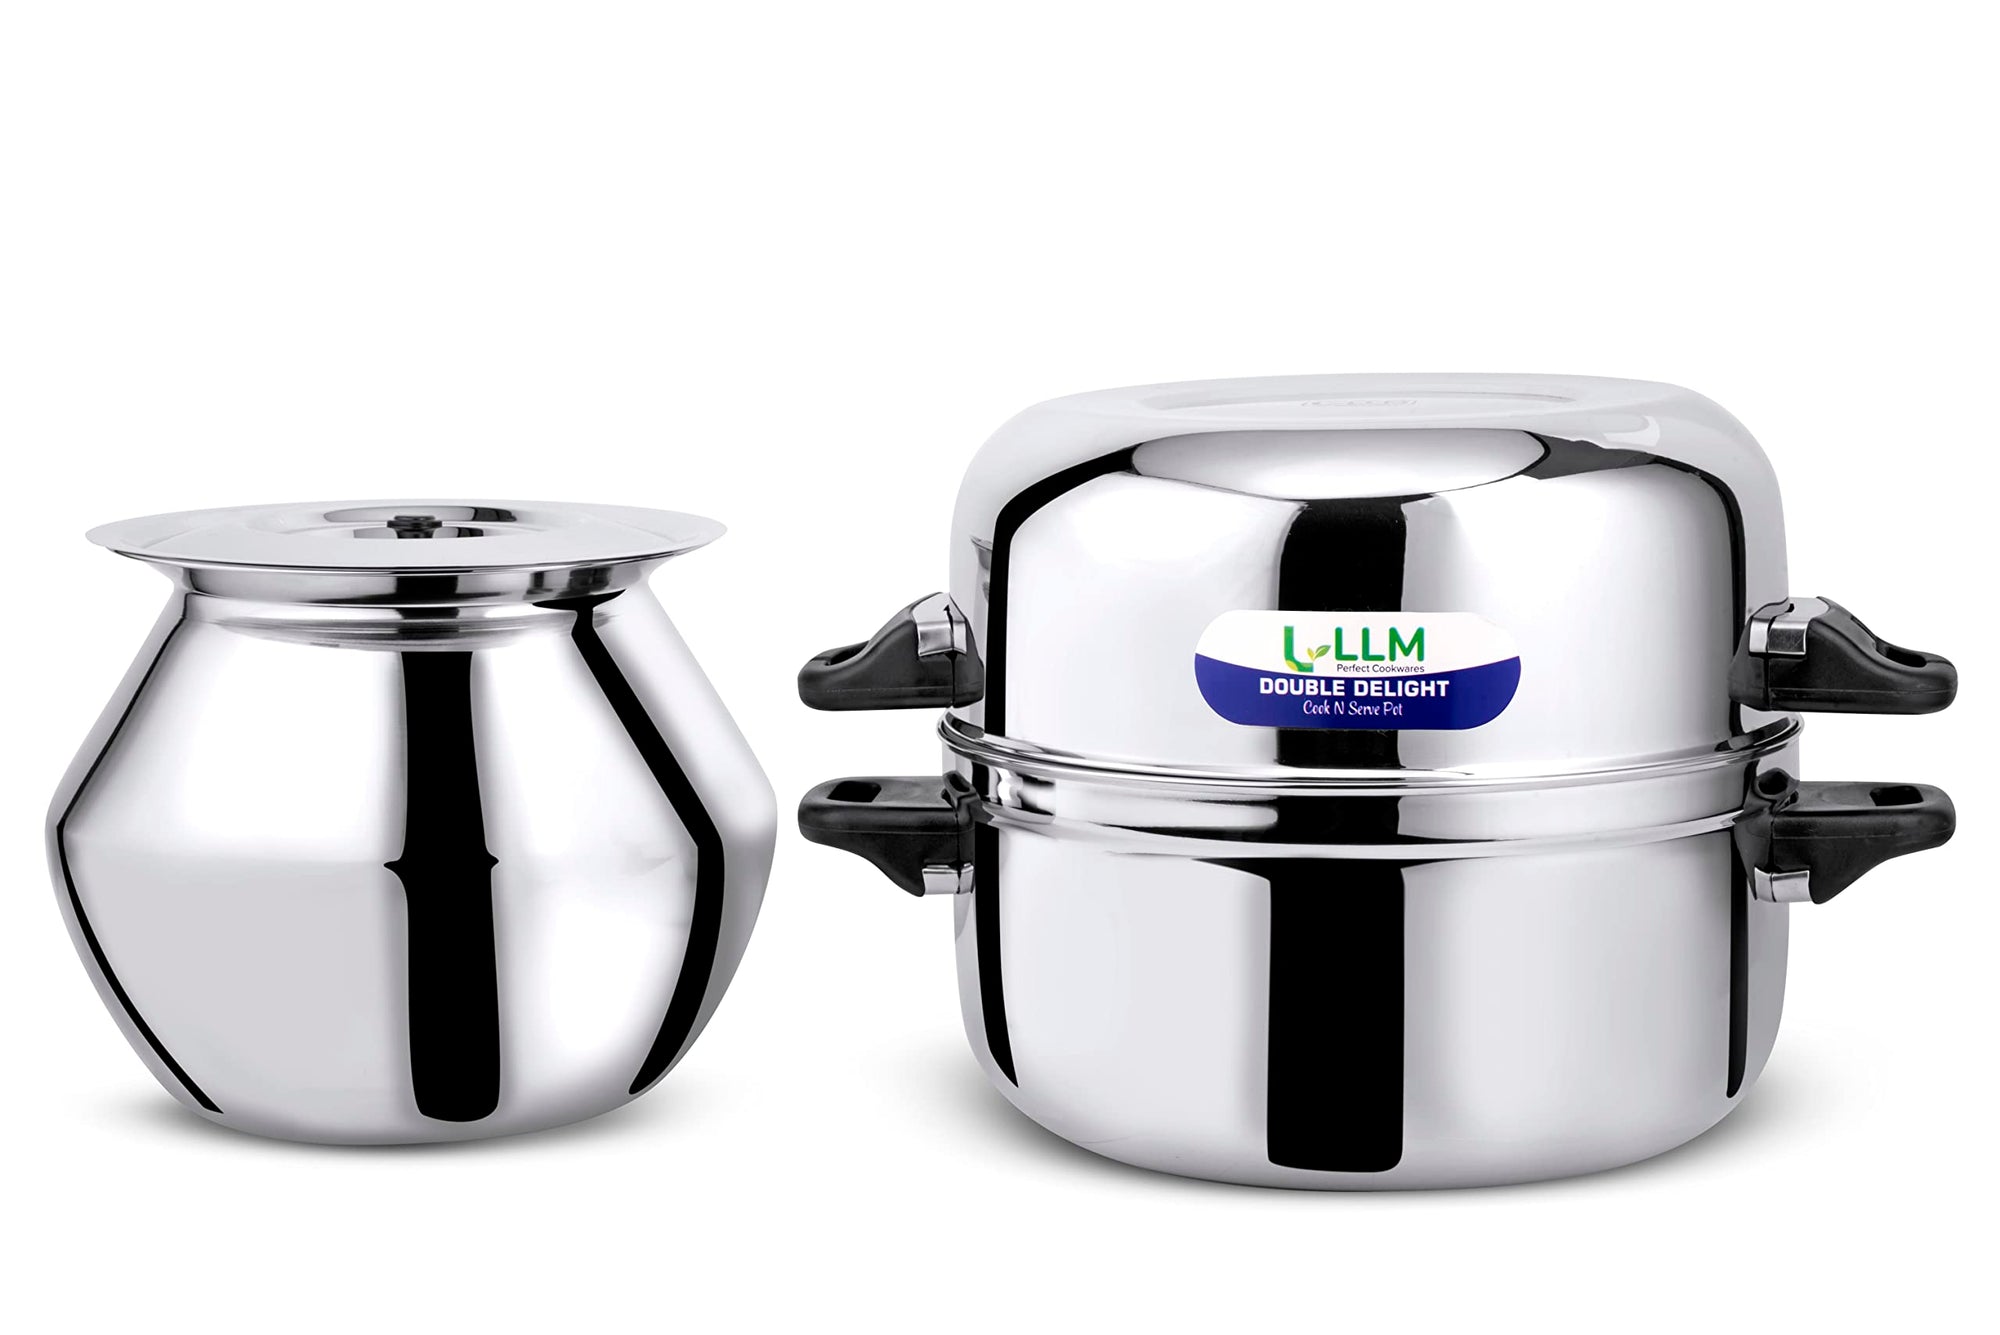 LLM Stainless Steel Double Delight Cook and Serve Pot Thermal Rice Cooker 1.0 Kg, Silver